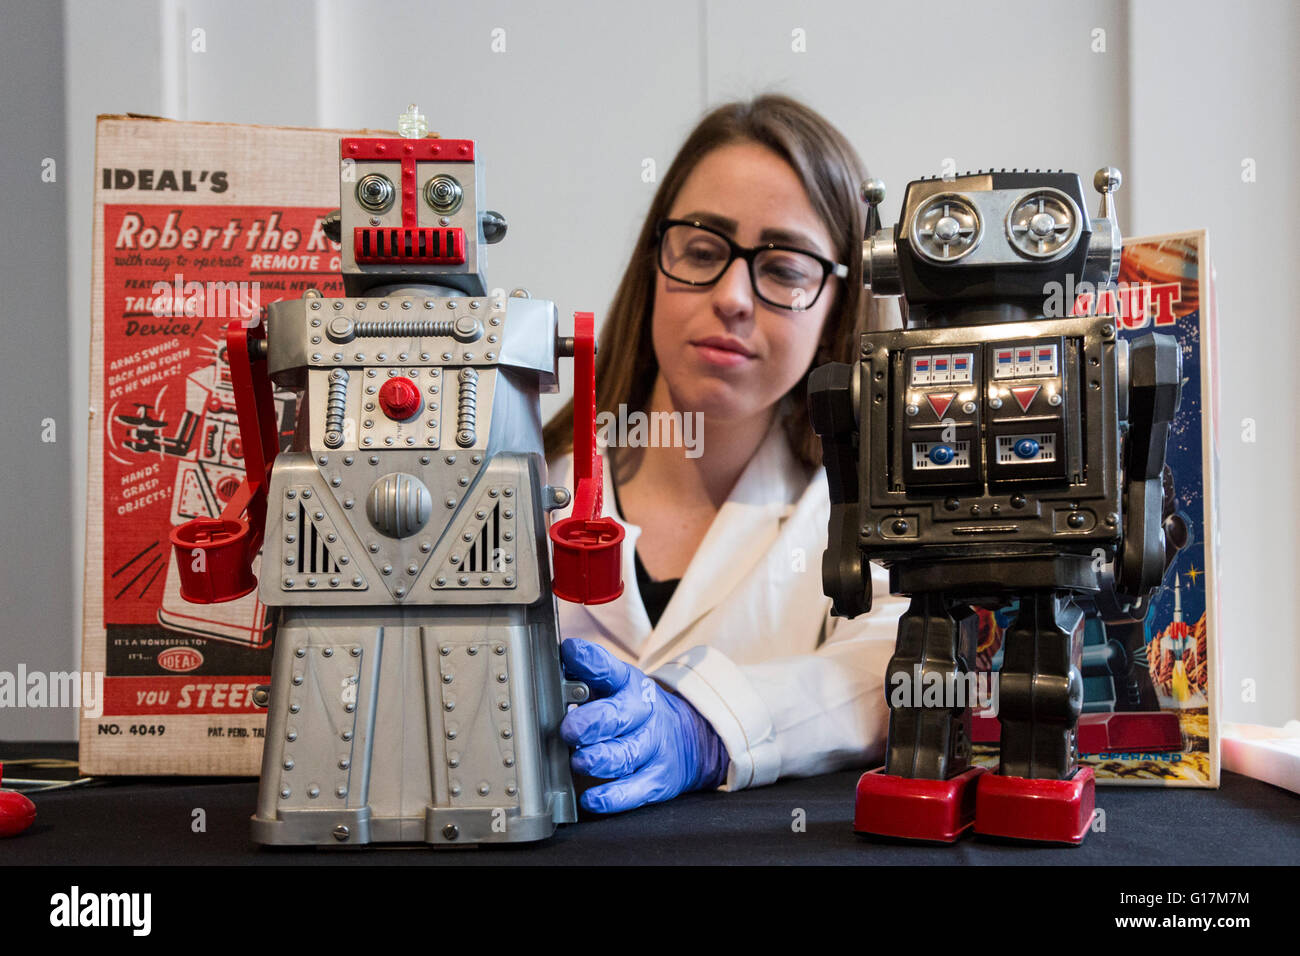 London, UK. 10 May 2016. Pictured: conservator Vanessa Applebaum handles toy robots Robert the Robot and the Super Astronaut Robot. The London Science Museum announces Rise of the Robots, the remarkable 500-year history of robots, in a new exhibition starting February 2017. Over 100 robots will feature in the exhibition which makes it the most significant collection of humanoid robots ever displayed in the world. Stock Photo